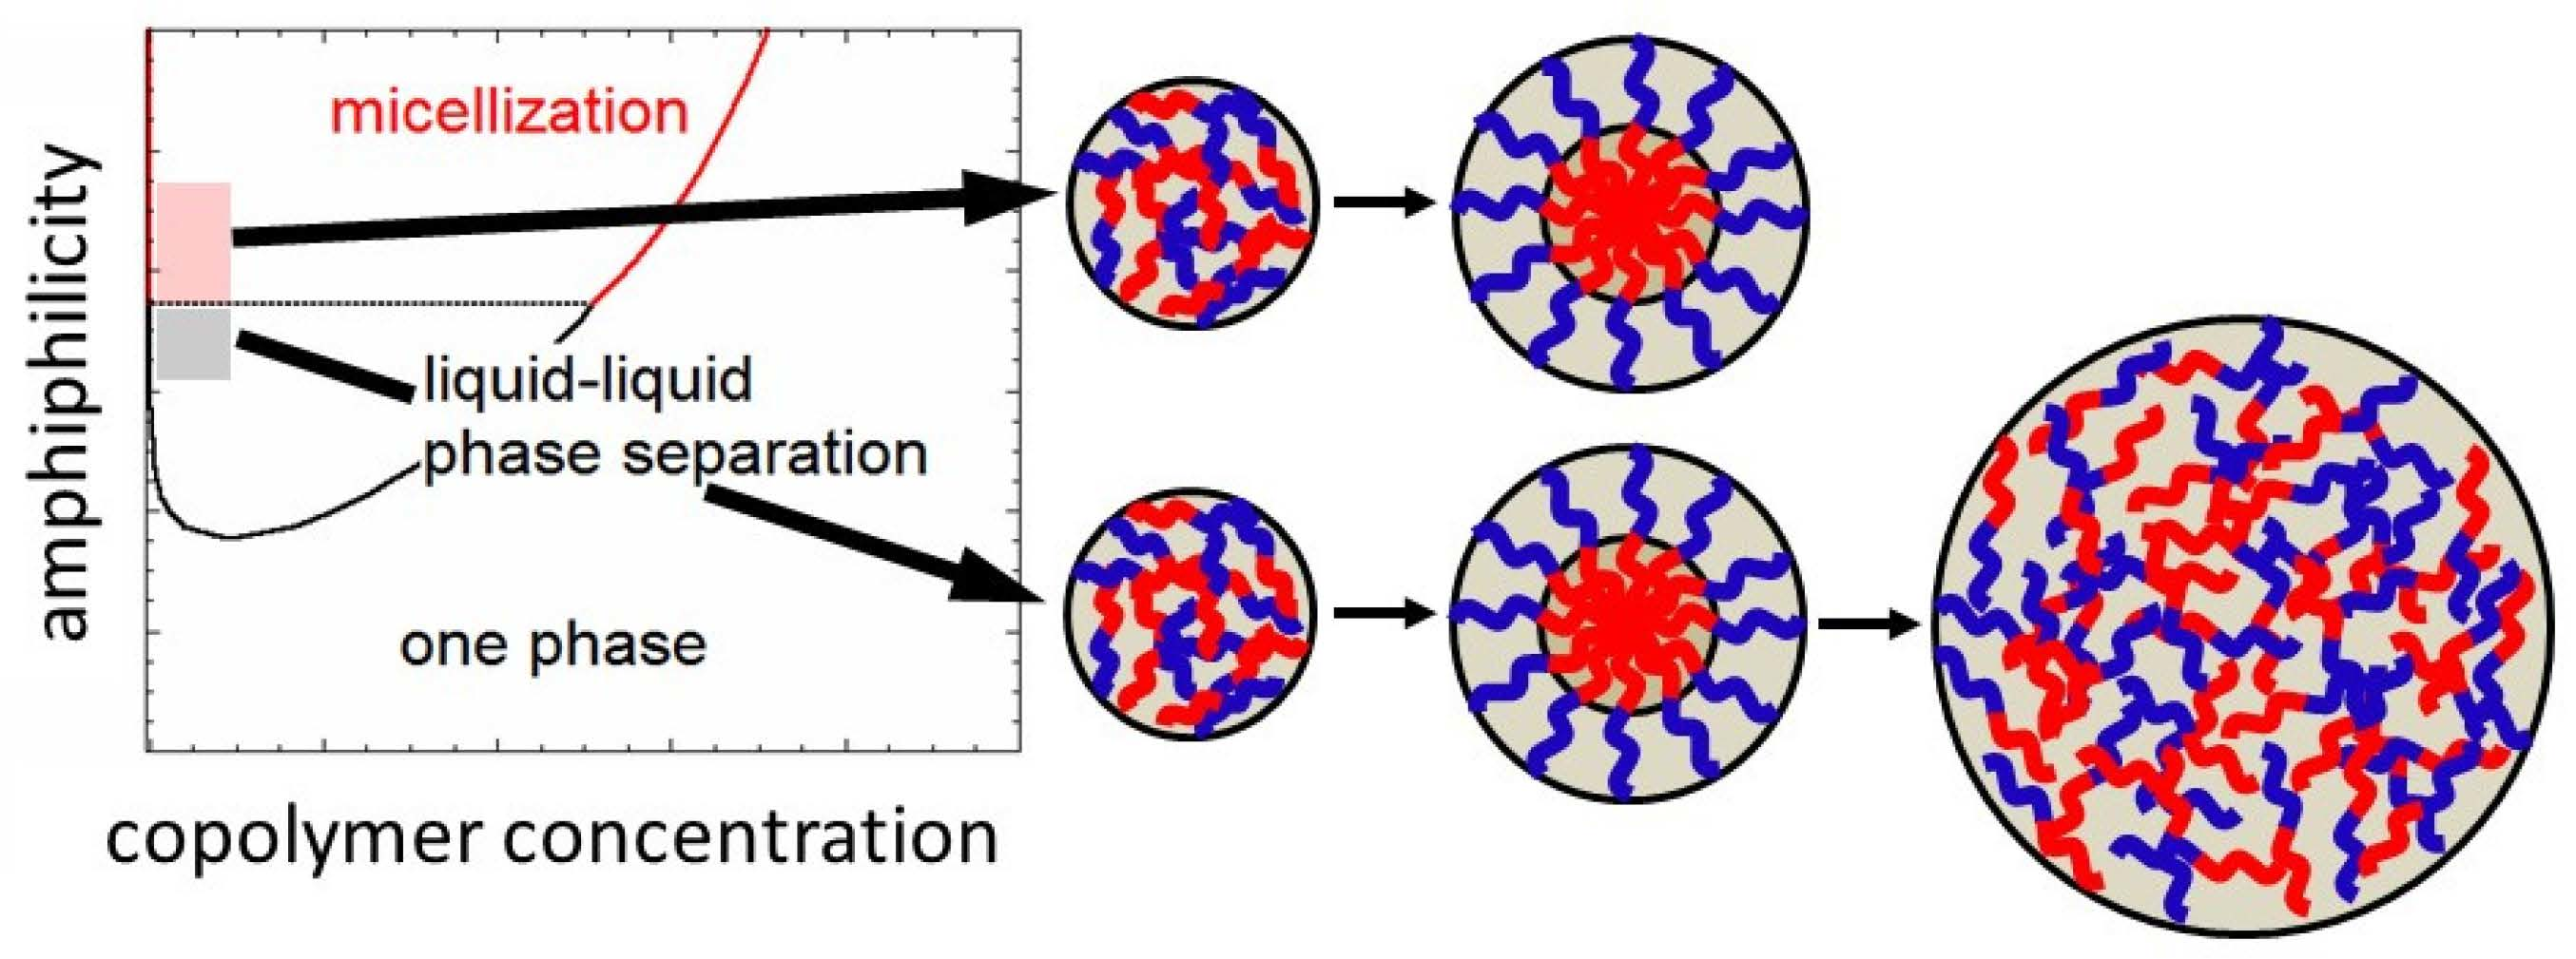 Polymers | Free Full-Text | Kinetics of Micellization and  Liquid–Liquid Phase Separation in Dilute Block Copolymer Solutions